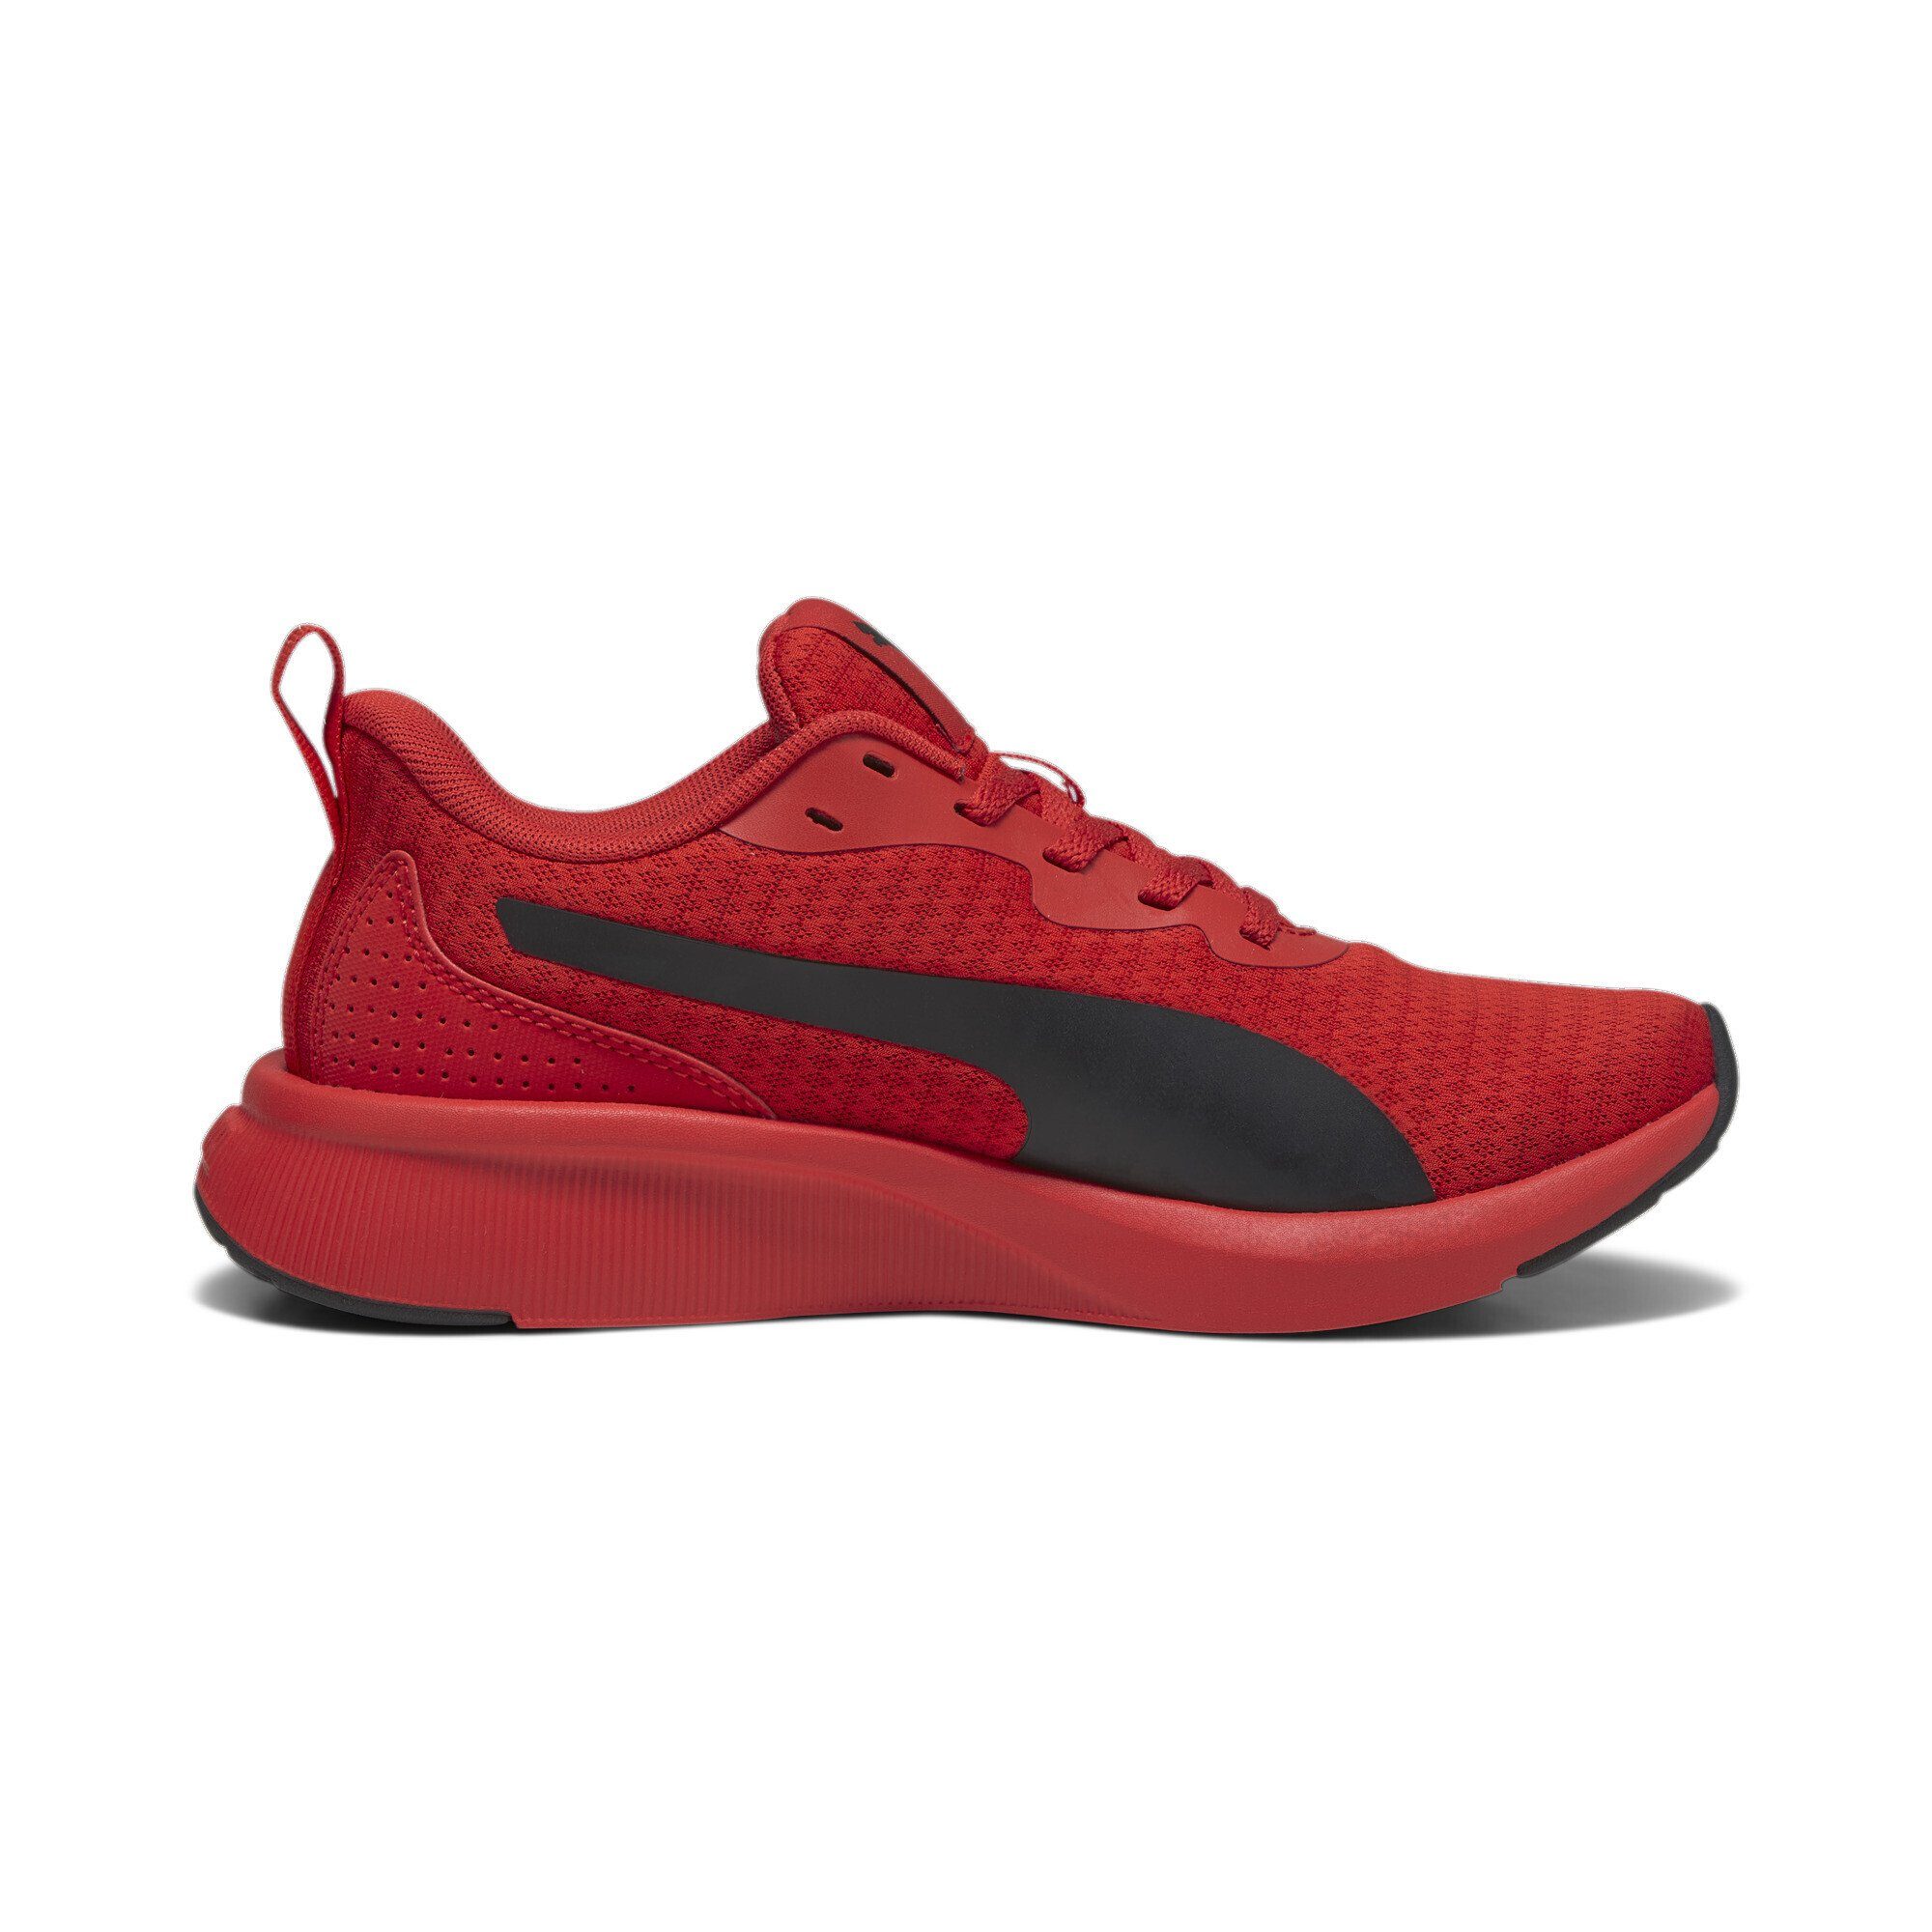 PUMA Flyer Lite Black Trainingsschuh Jugendliche Red Time For Sneakers All